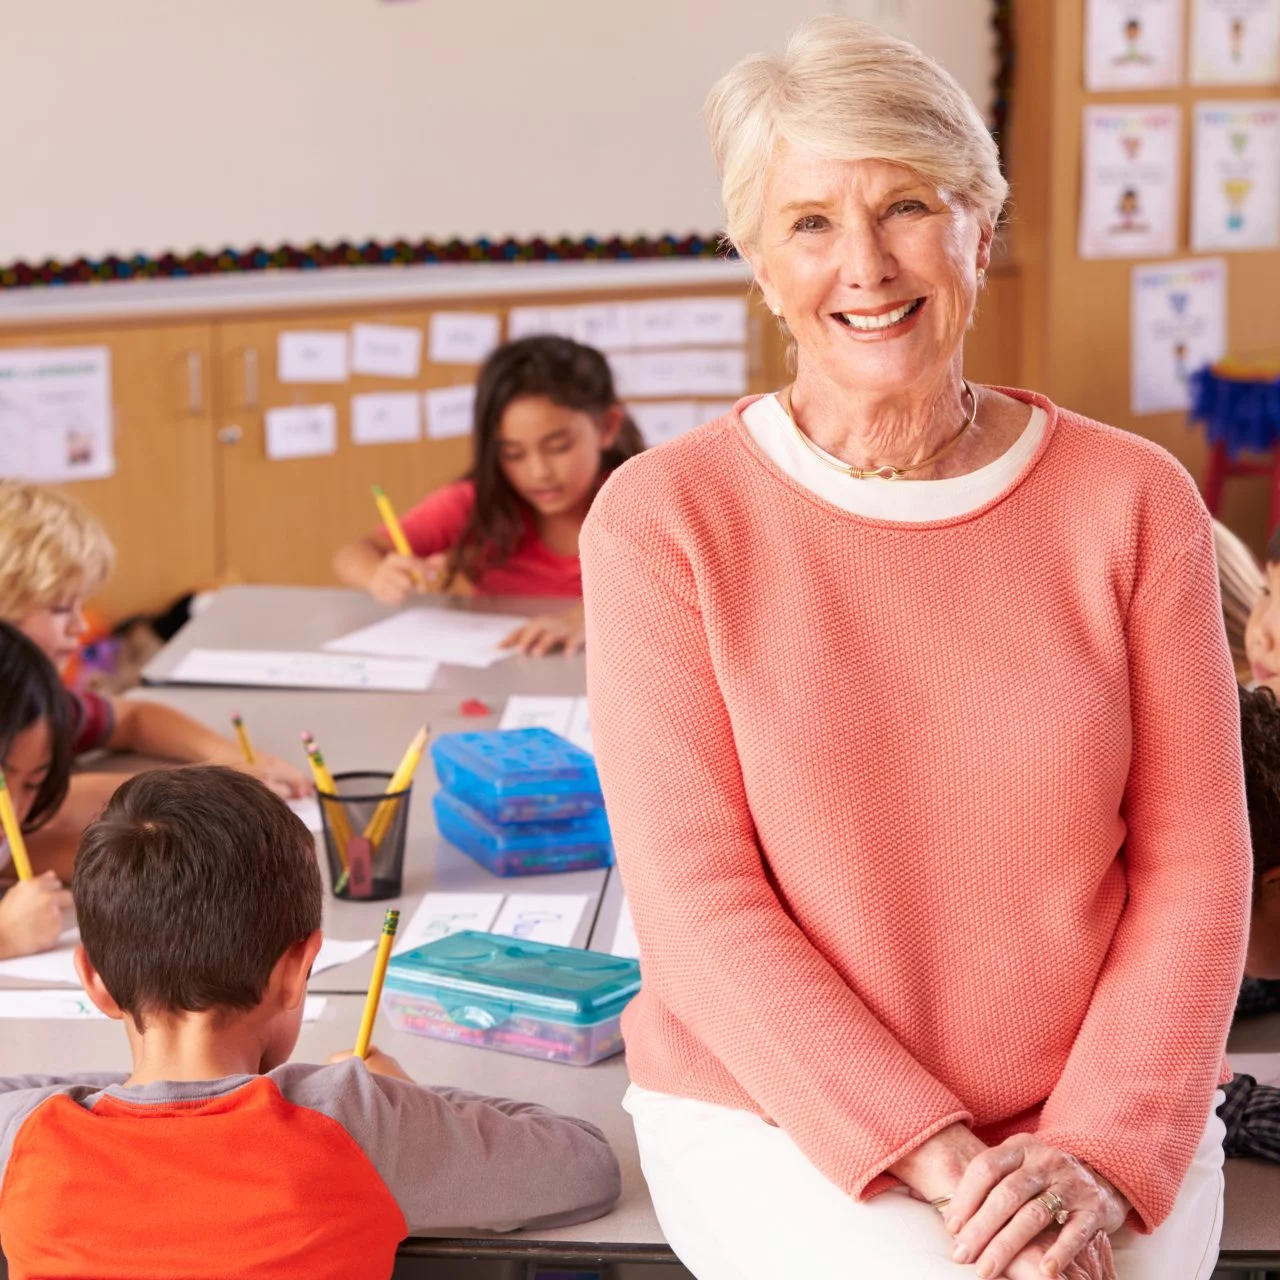 Older female teacher smiling next to her students working